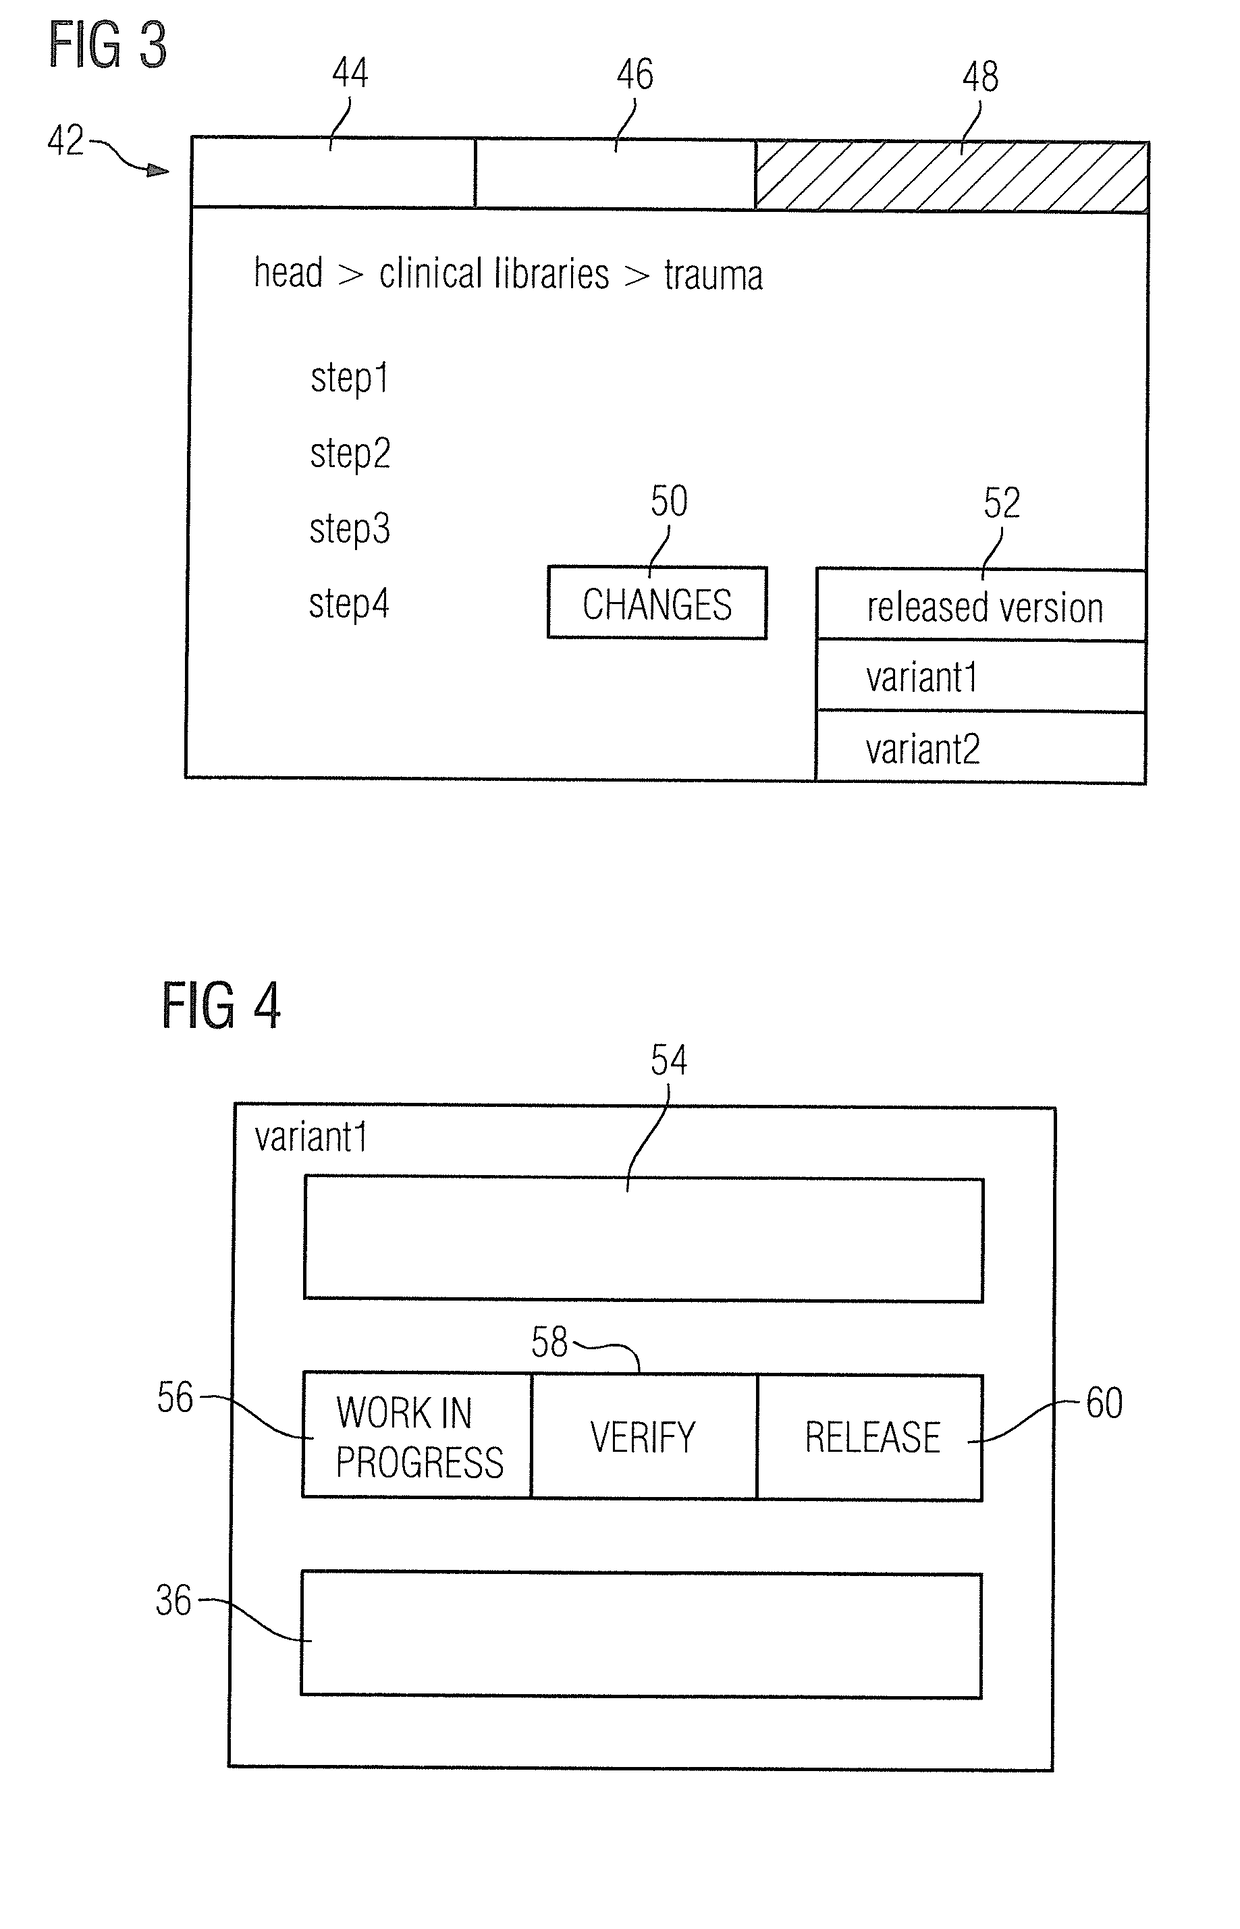 Operating method for a medical imaging apparatus